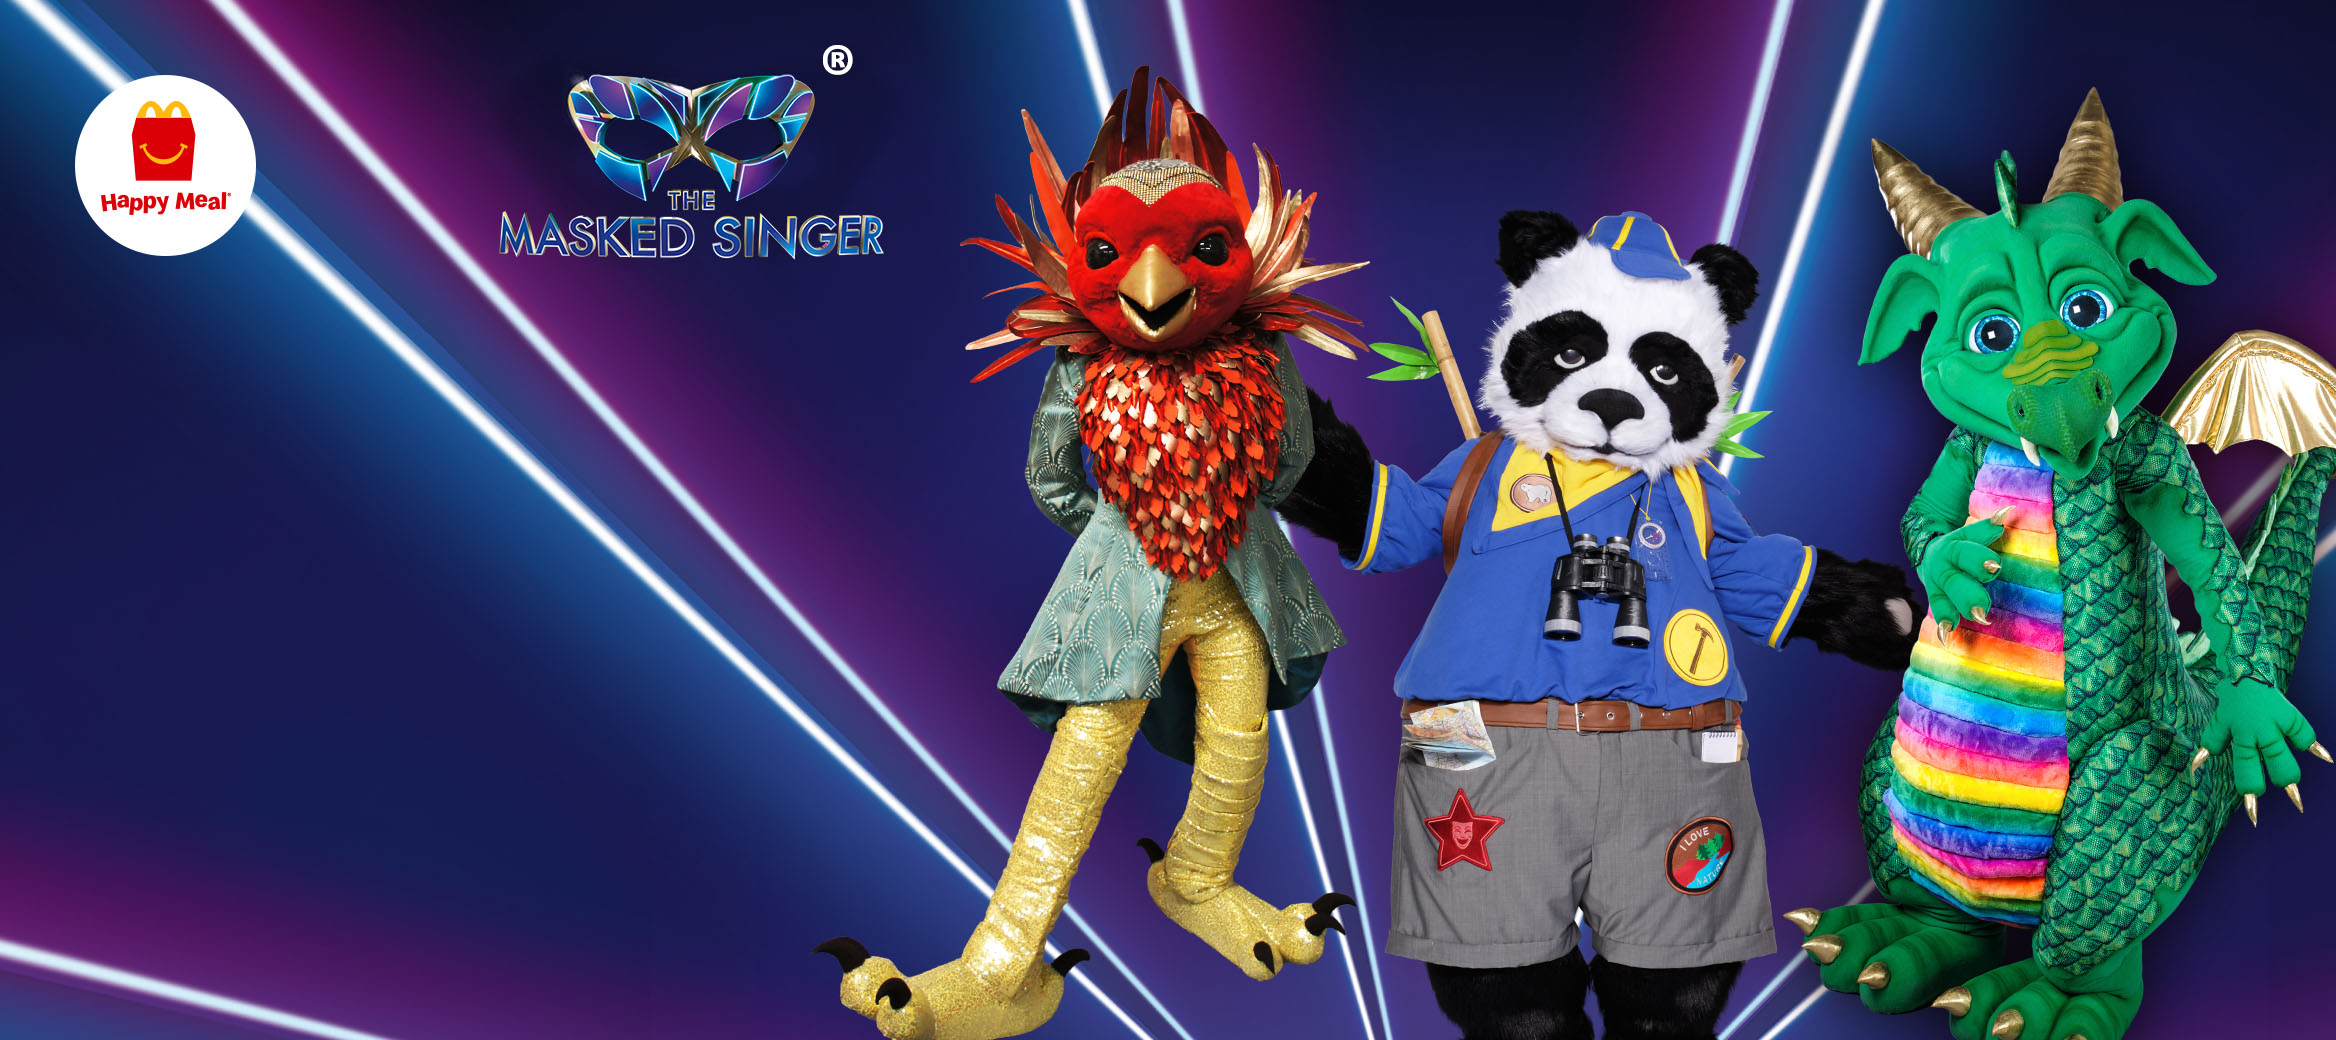 The Masked Singer characters on a blue background with a mask and laser lights.